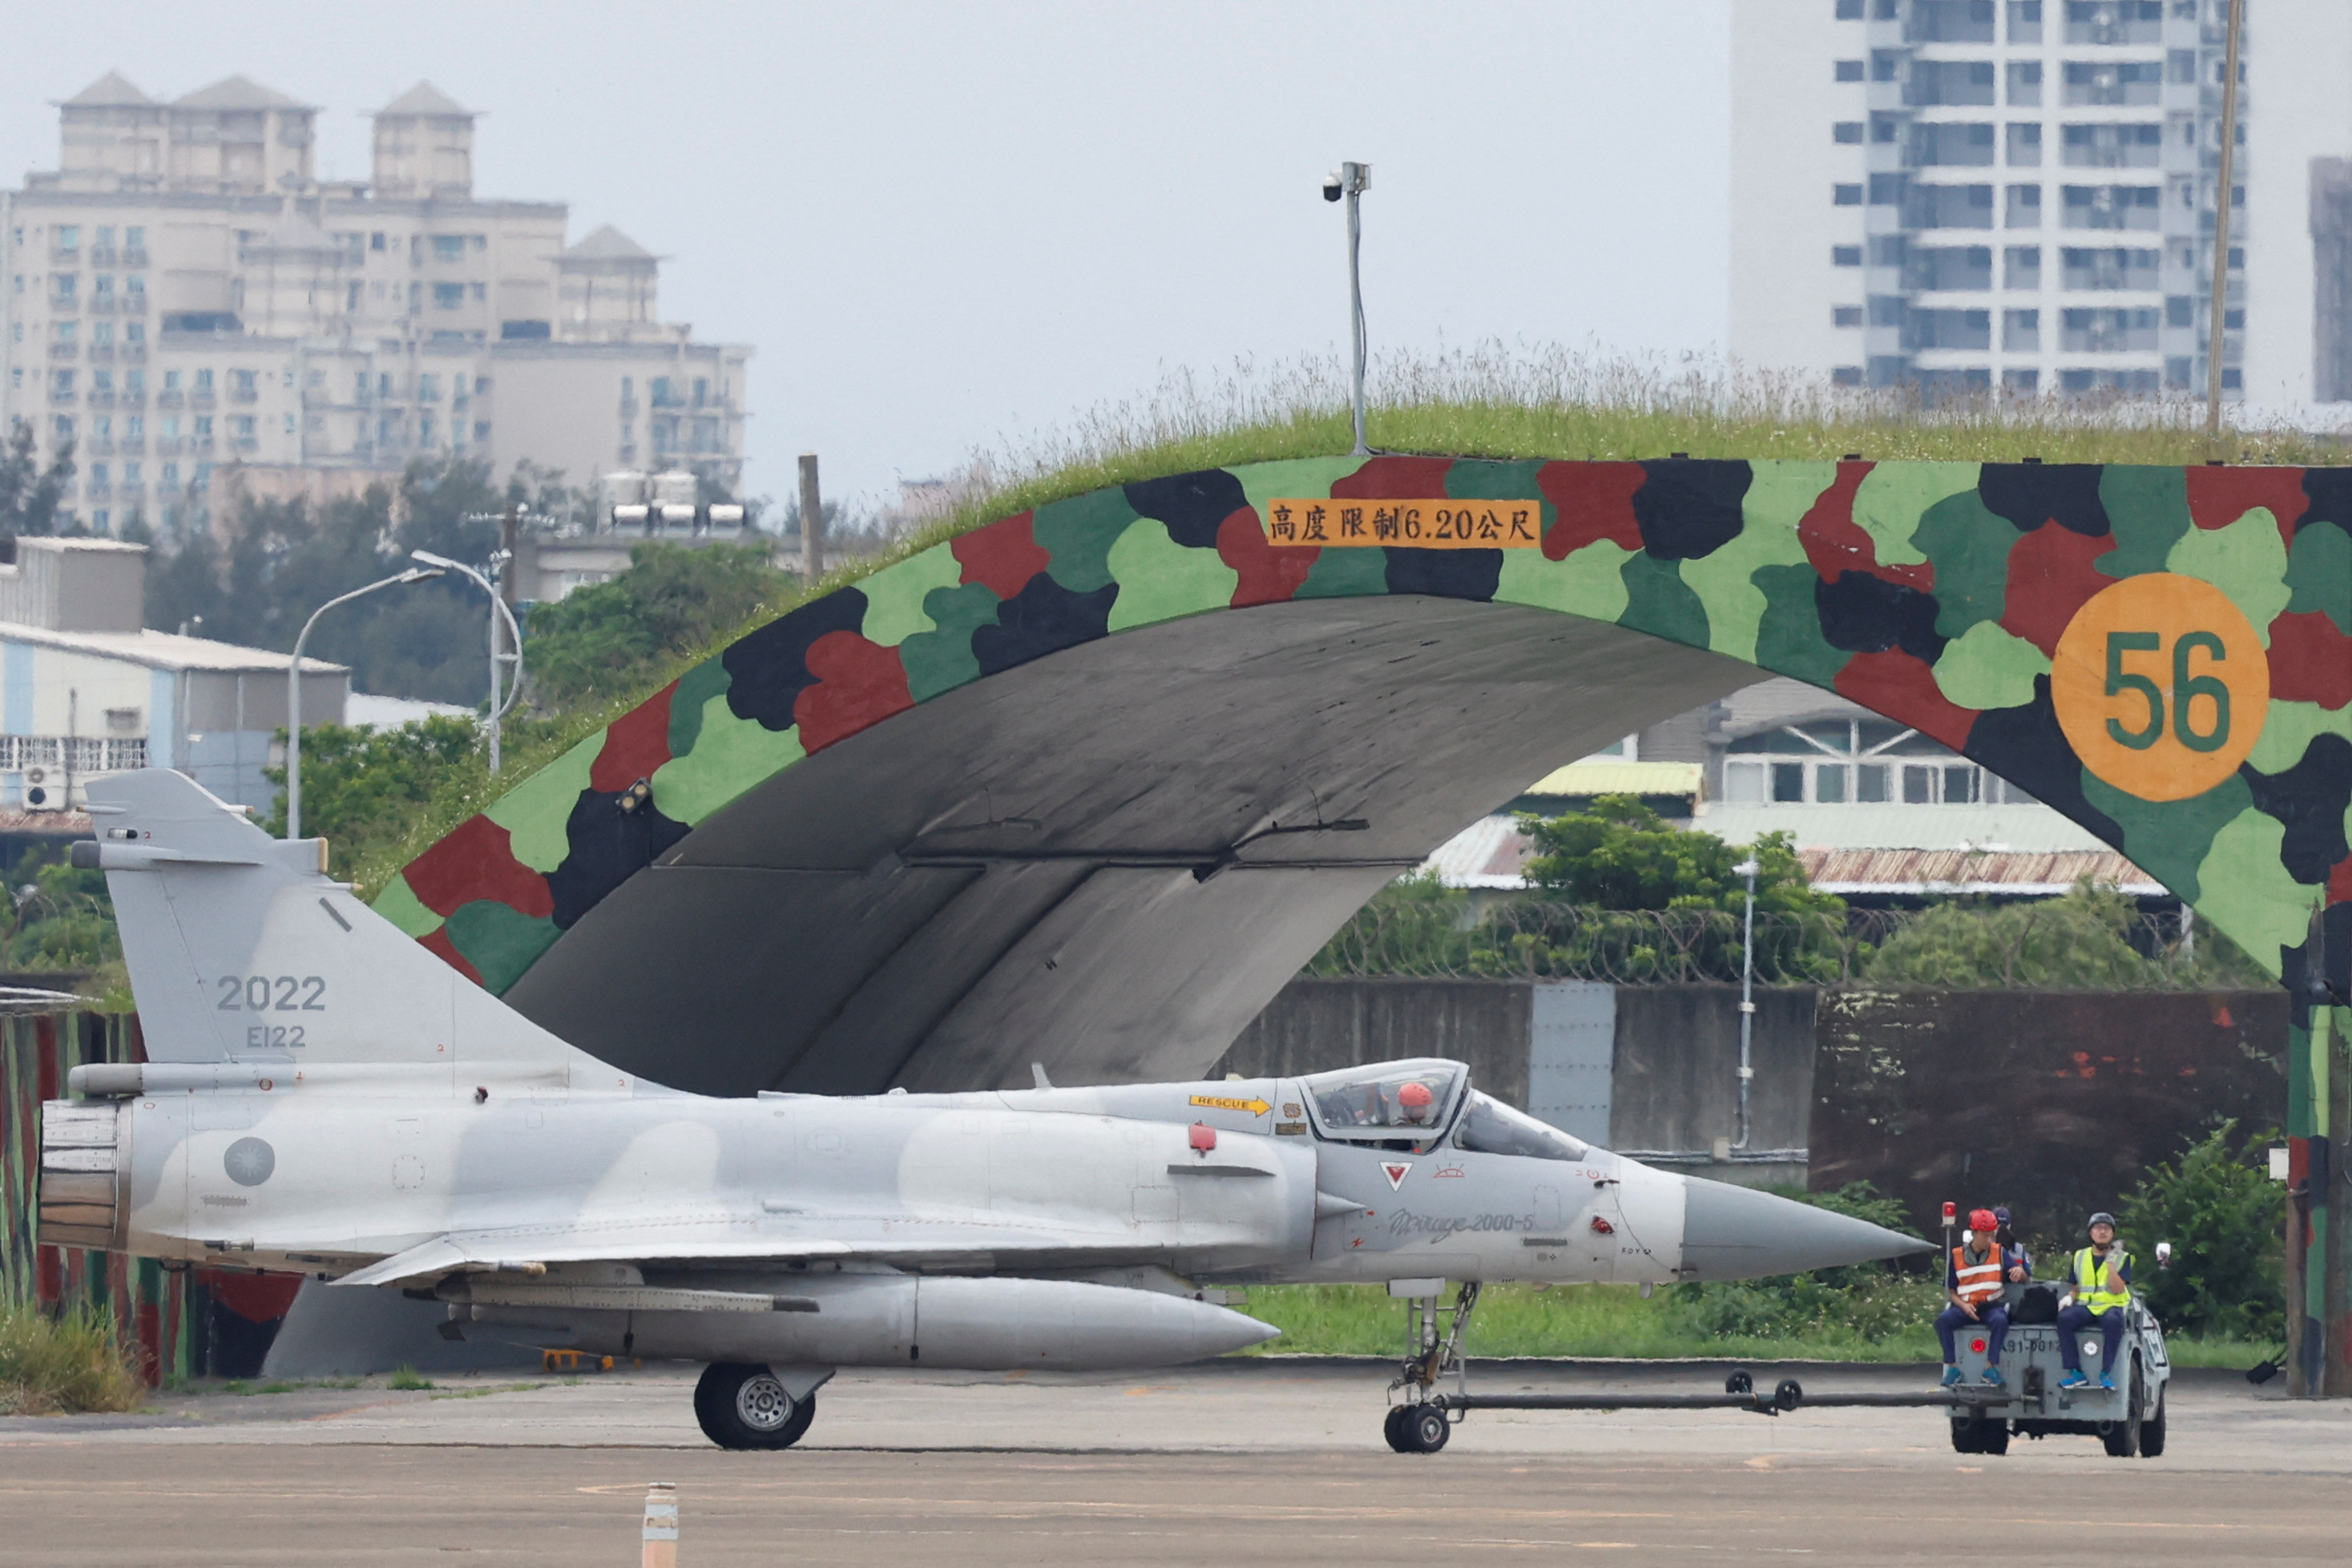 A Taiwan Air Force Mirage 2000-5 aircraft is transported by ground staff at Hsinchu Air Base in Hsinchu